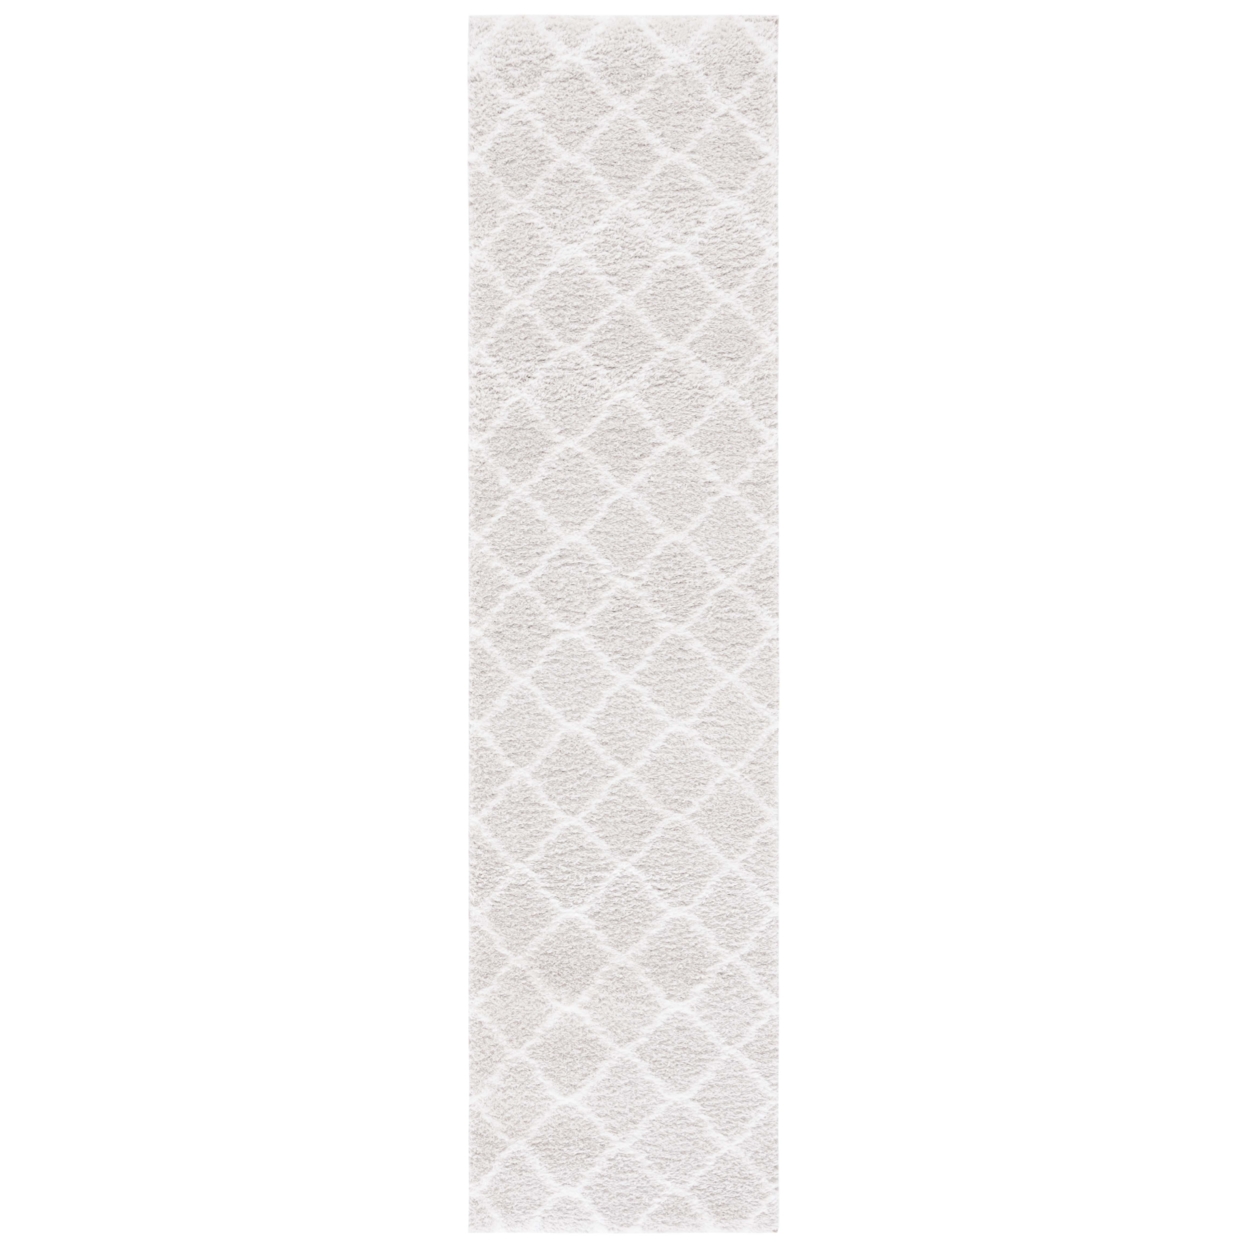 SAFAVIEH Tahoe Shag Collection THO675G Silver / White Rug - 5' X 7'